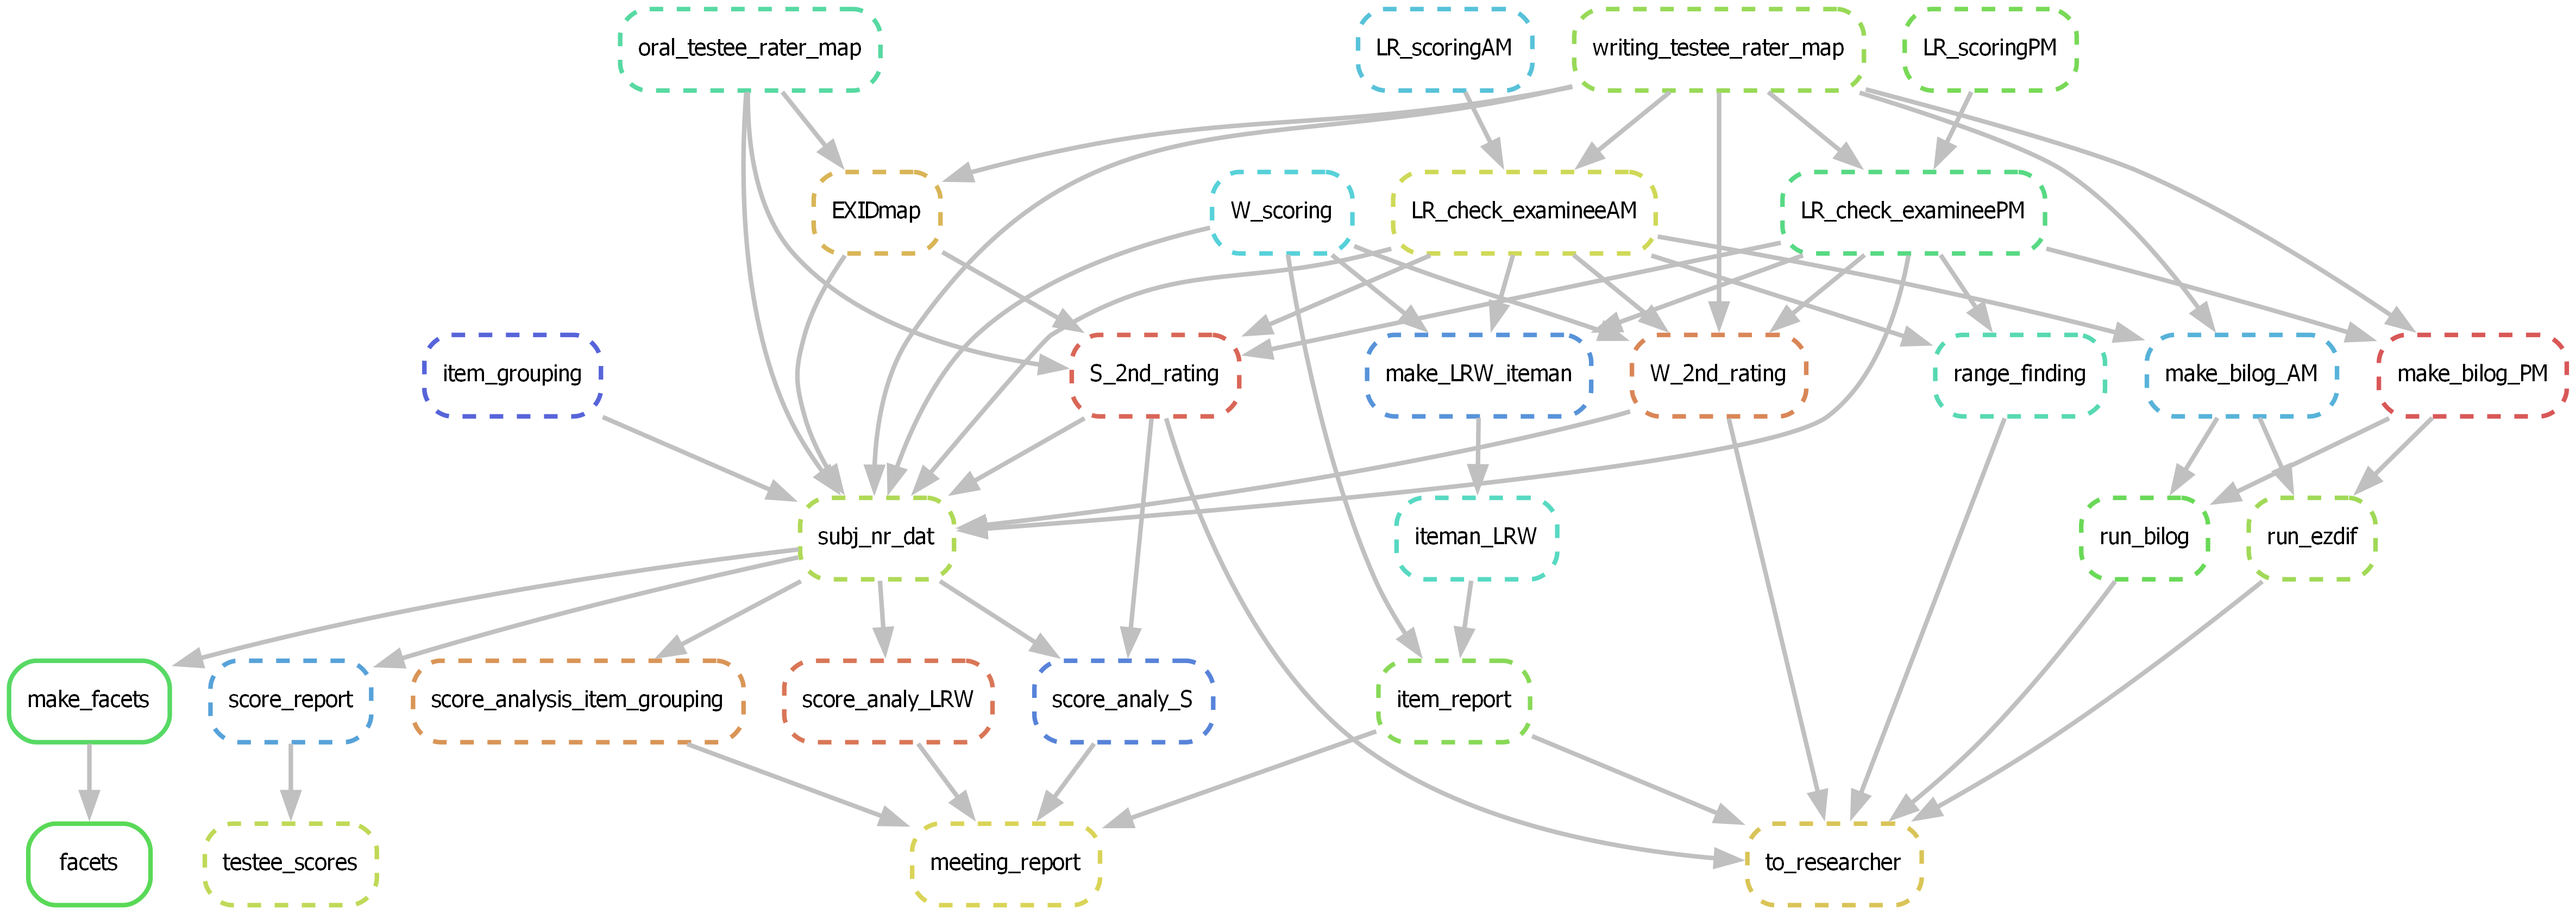 Data analysis workflow graph generated by Snakemake